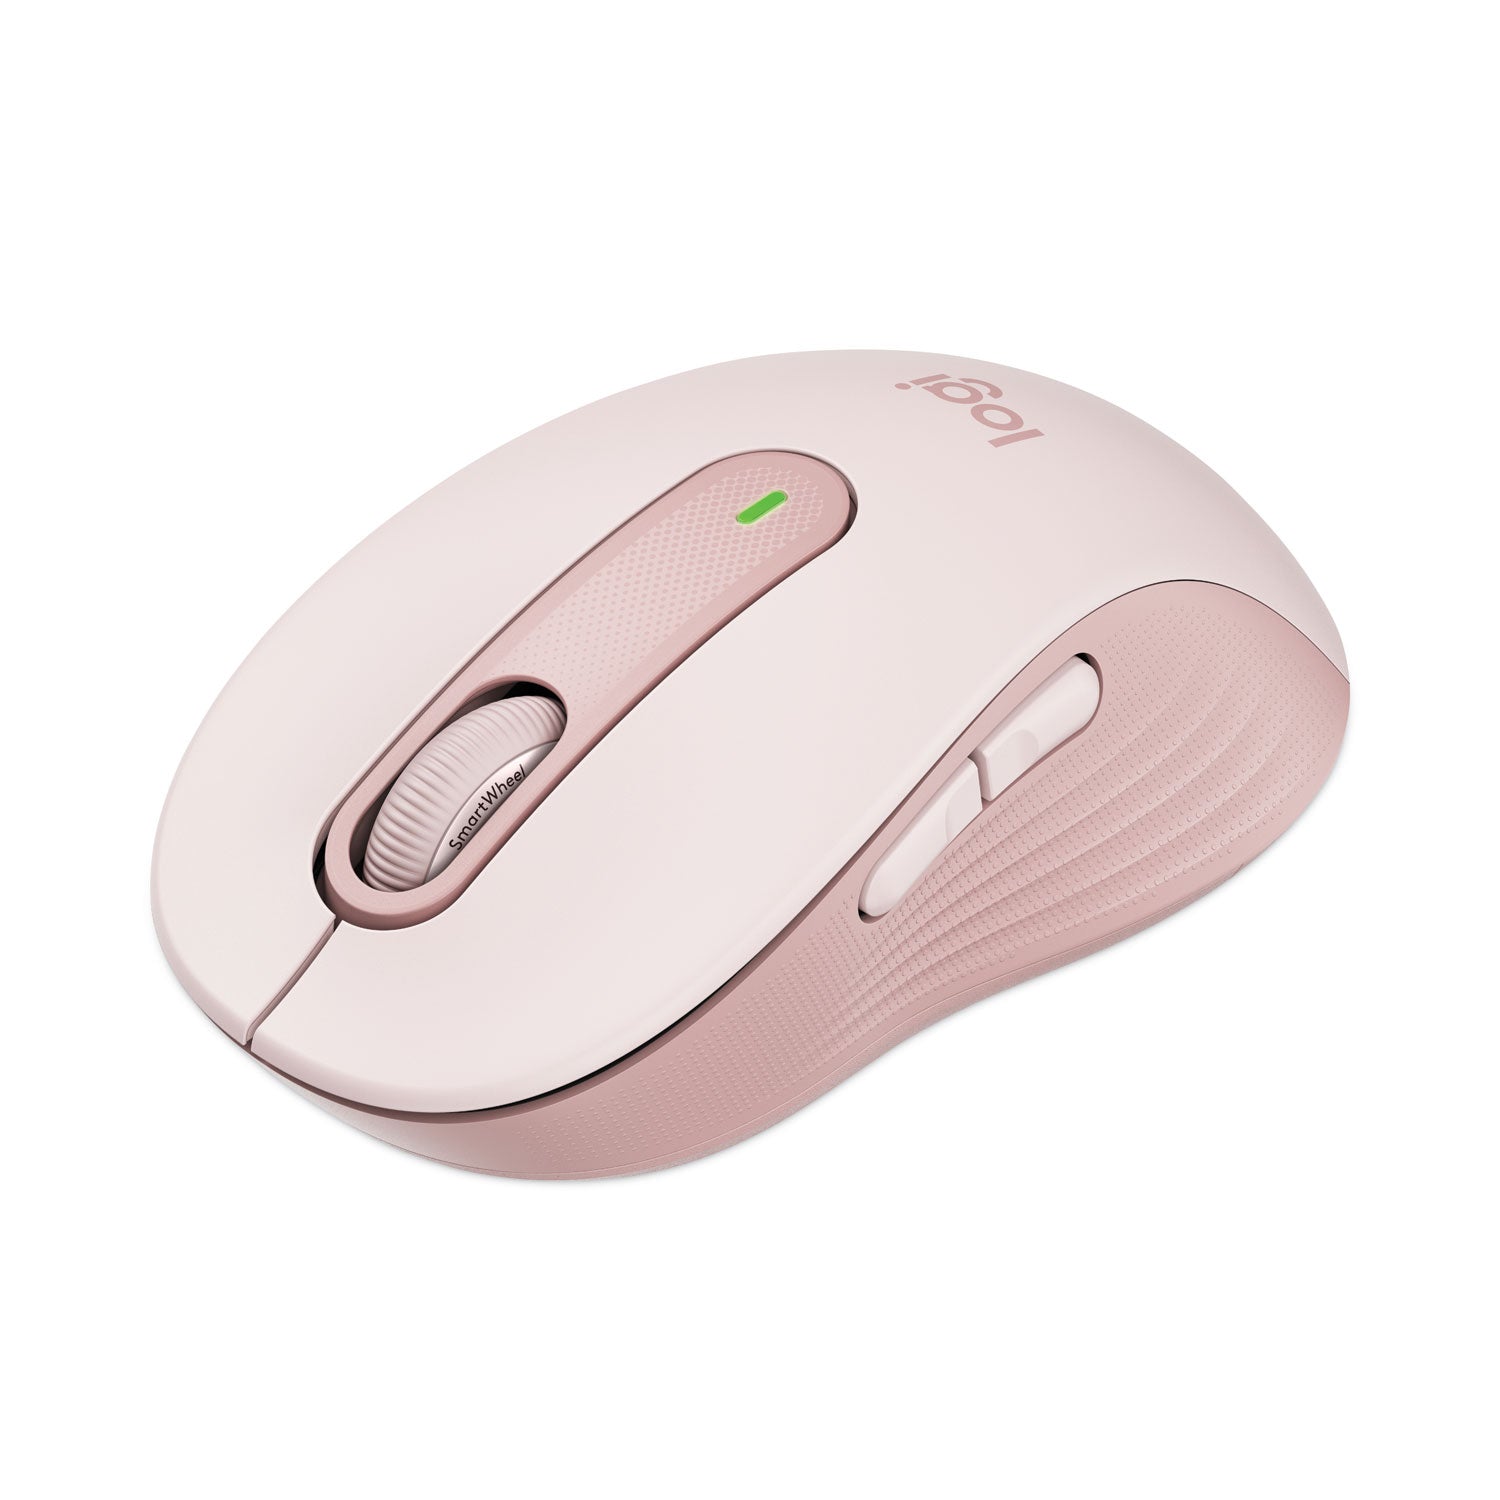 signature-m650-wireless-mouse-medium-24-ghz-frequency-33-ft-wireless-range-right-hand-use-rose_log910006251 - 2